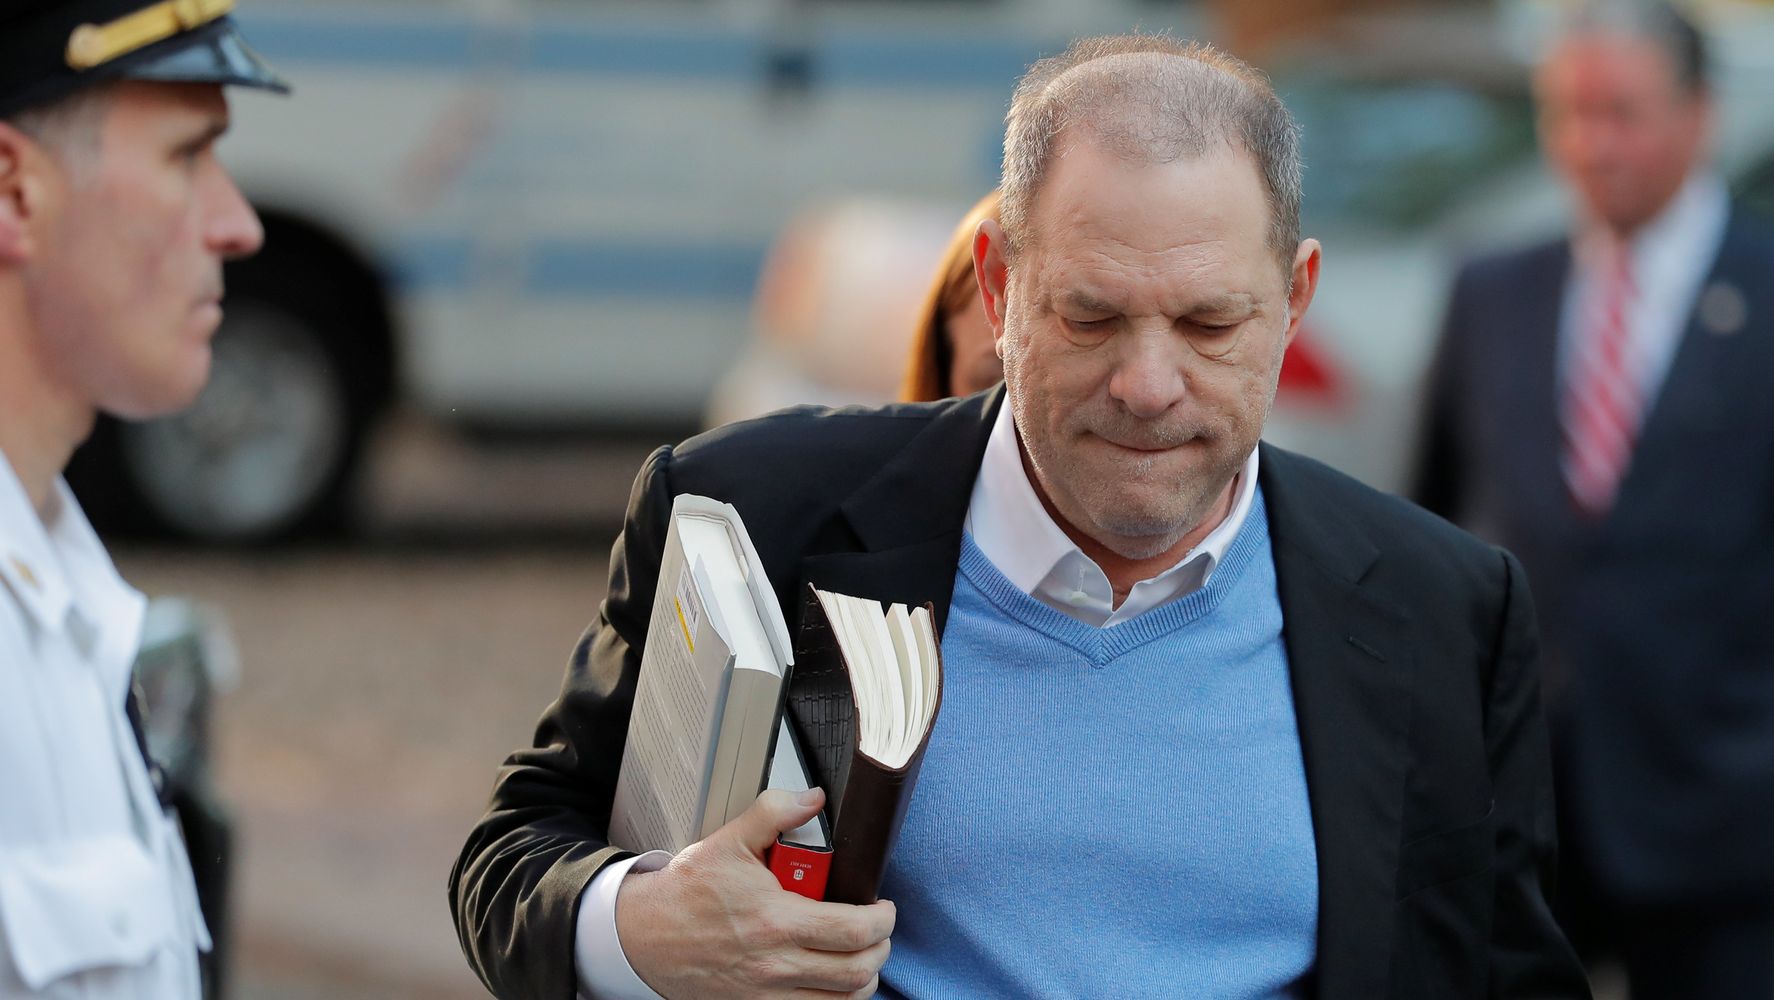 Harvey Weinstein Turns Himself In To Police For Alleged Sex Crimes Huffpost News 8863